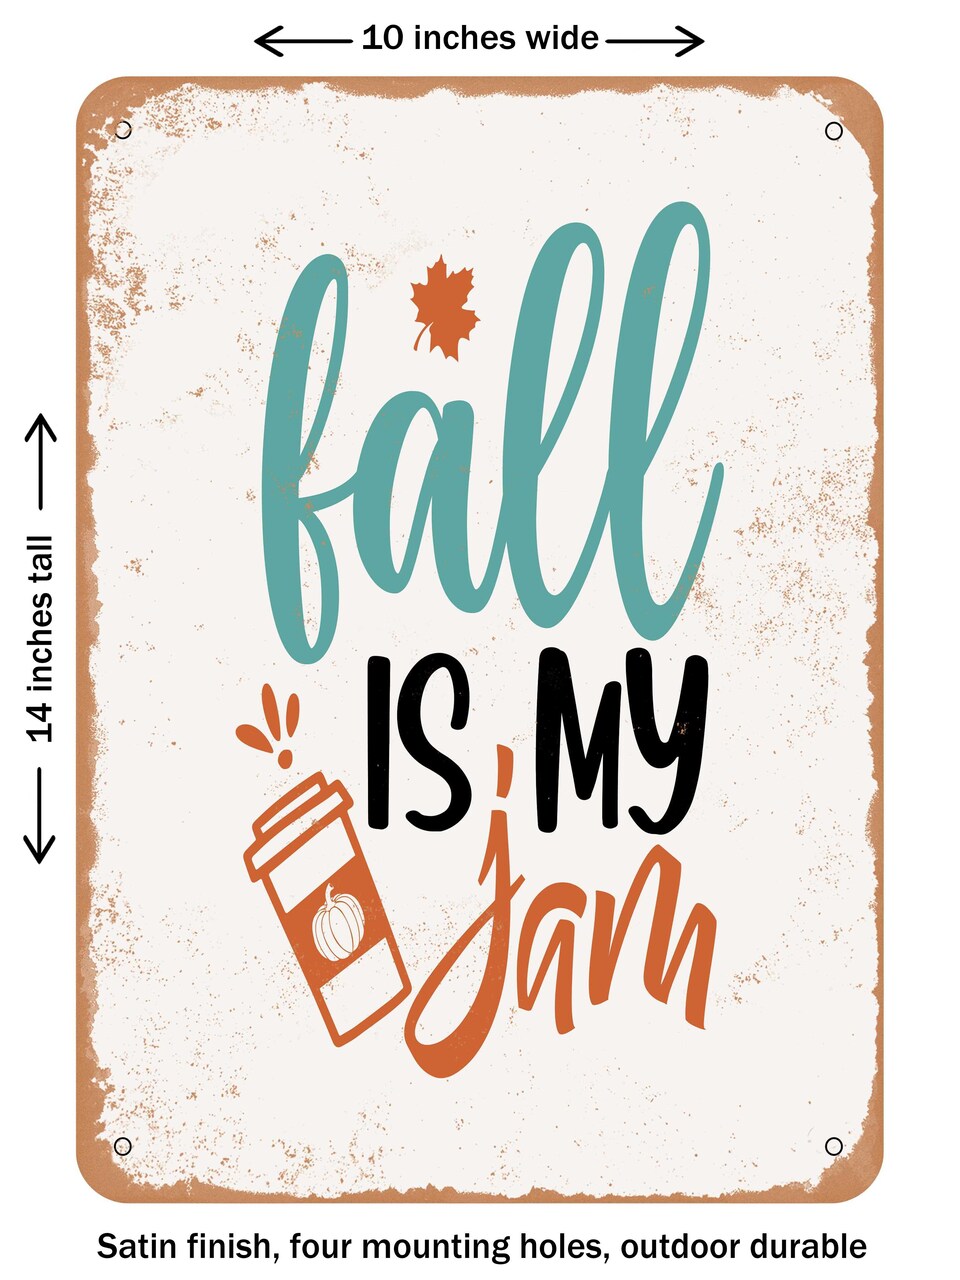 DECORATIVE METAL SIGN - Fall is My Jam  - Vintage Rusty Look